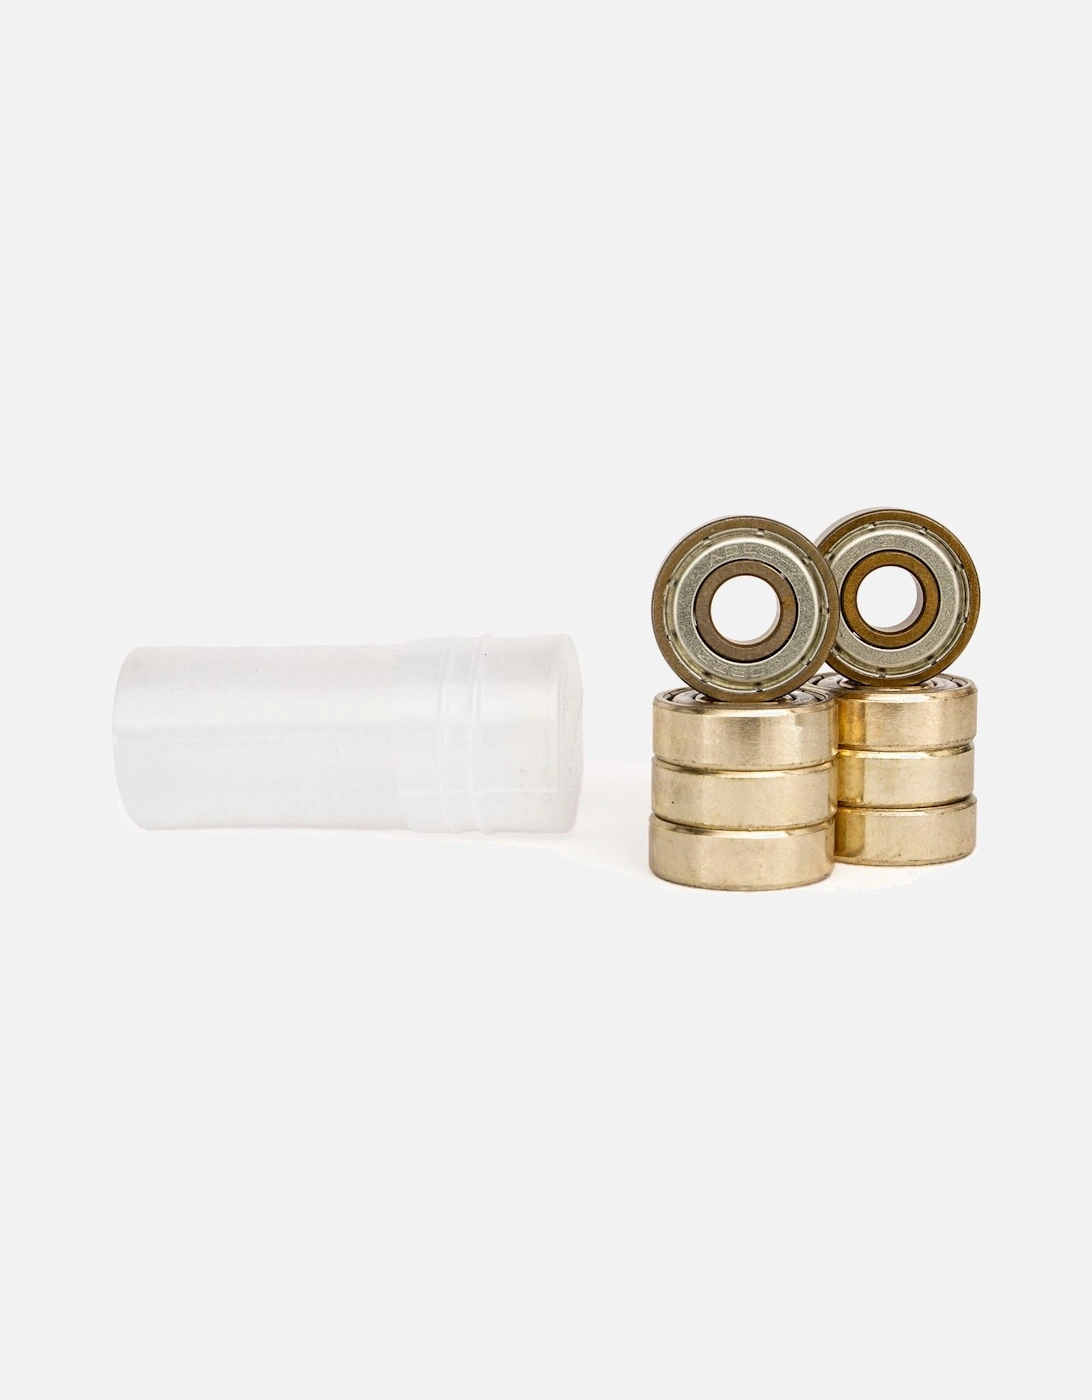 Abec 7 Chrome Goldies Bearings - 8 Pack, 2 of 1